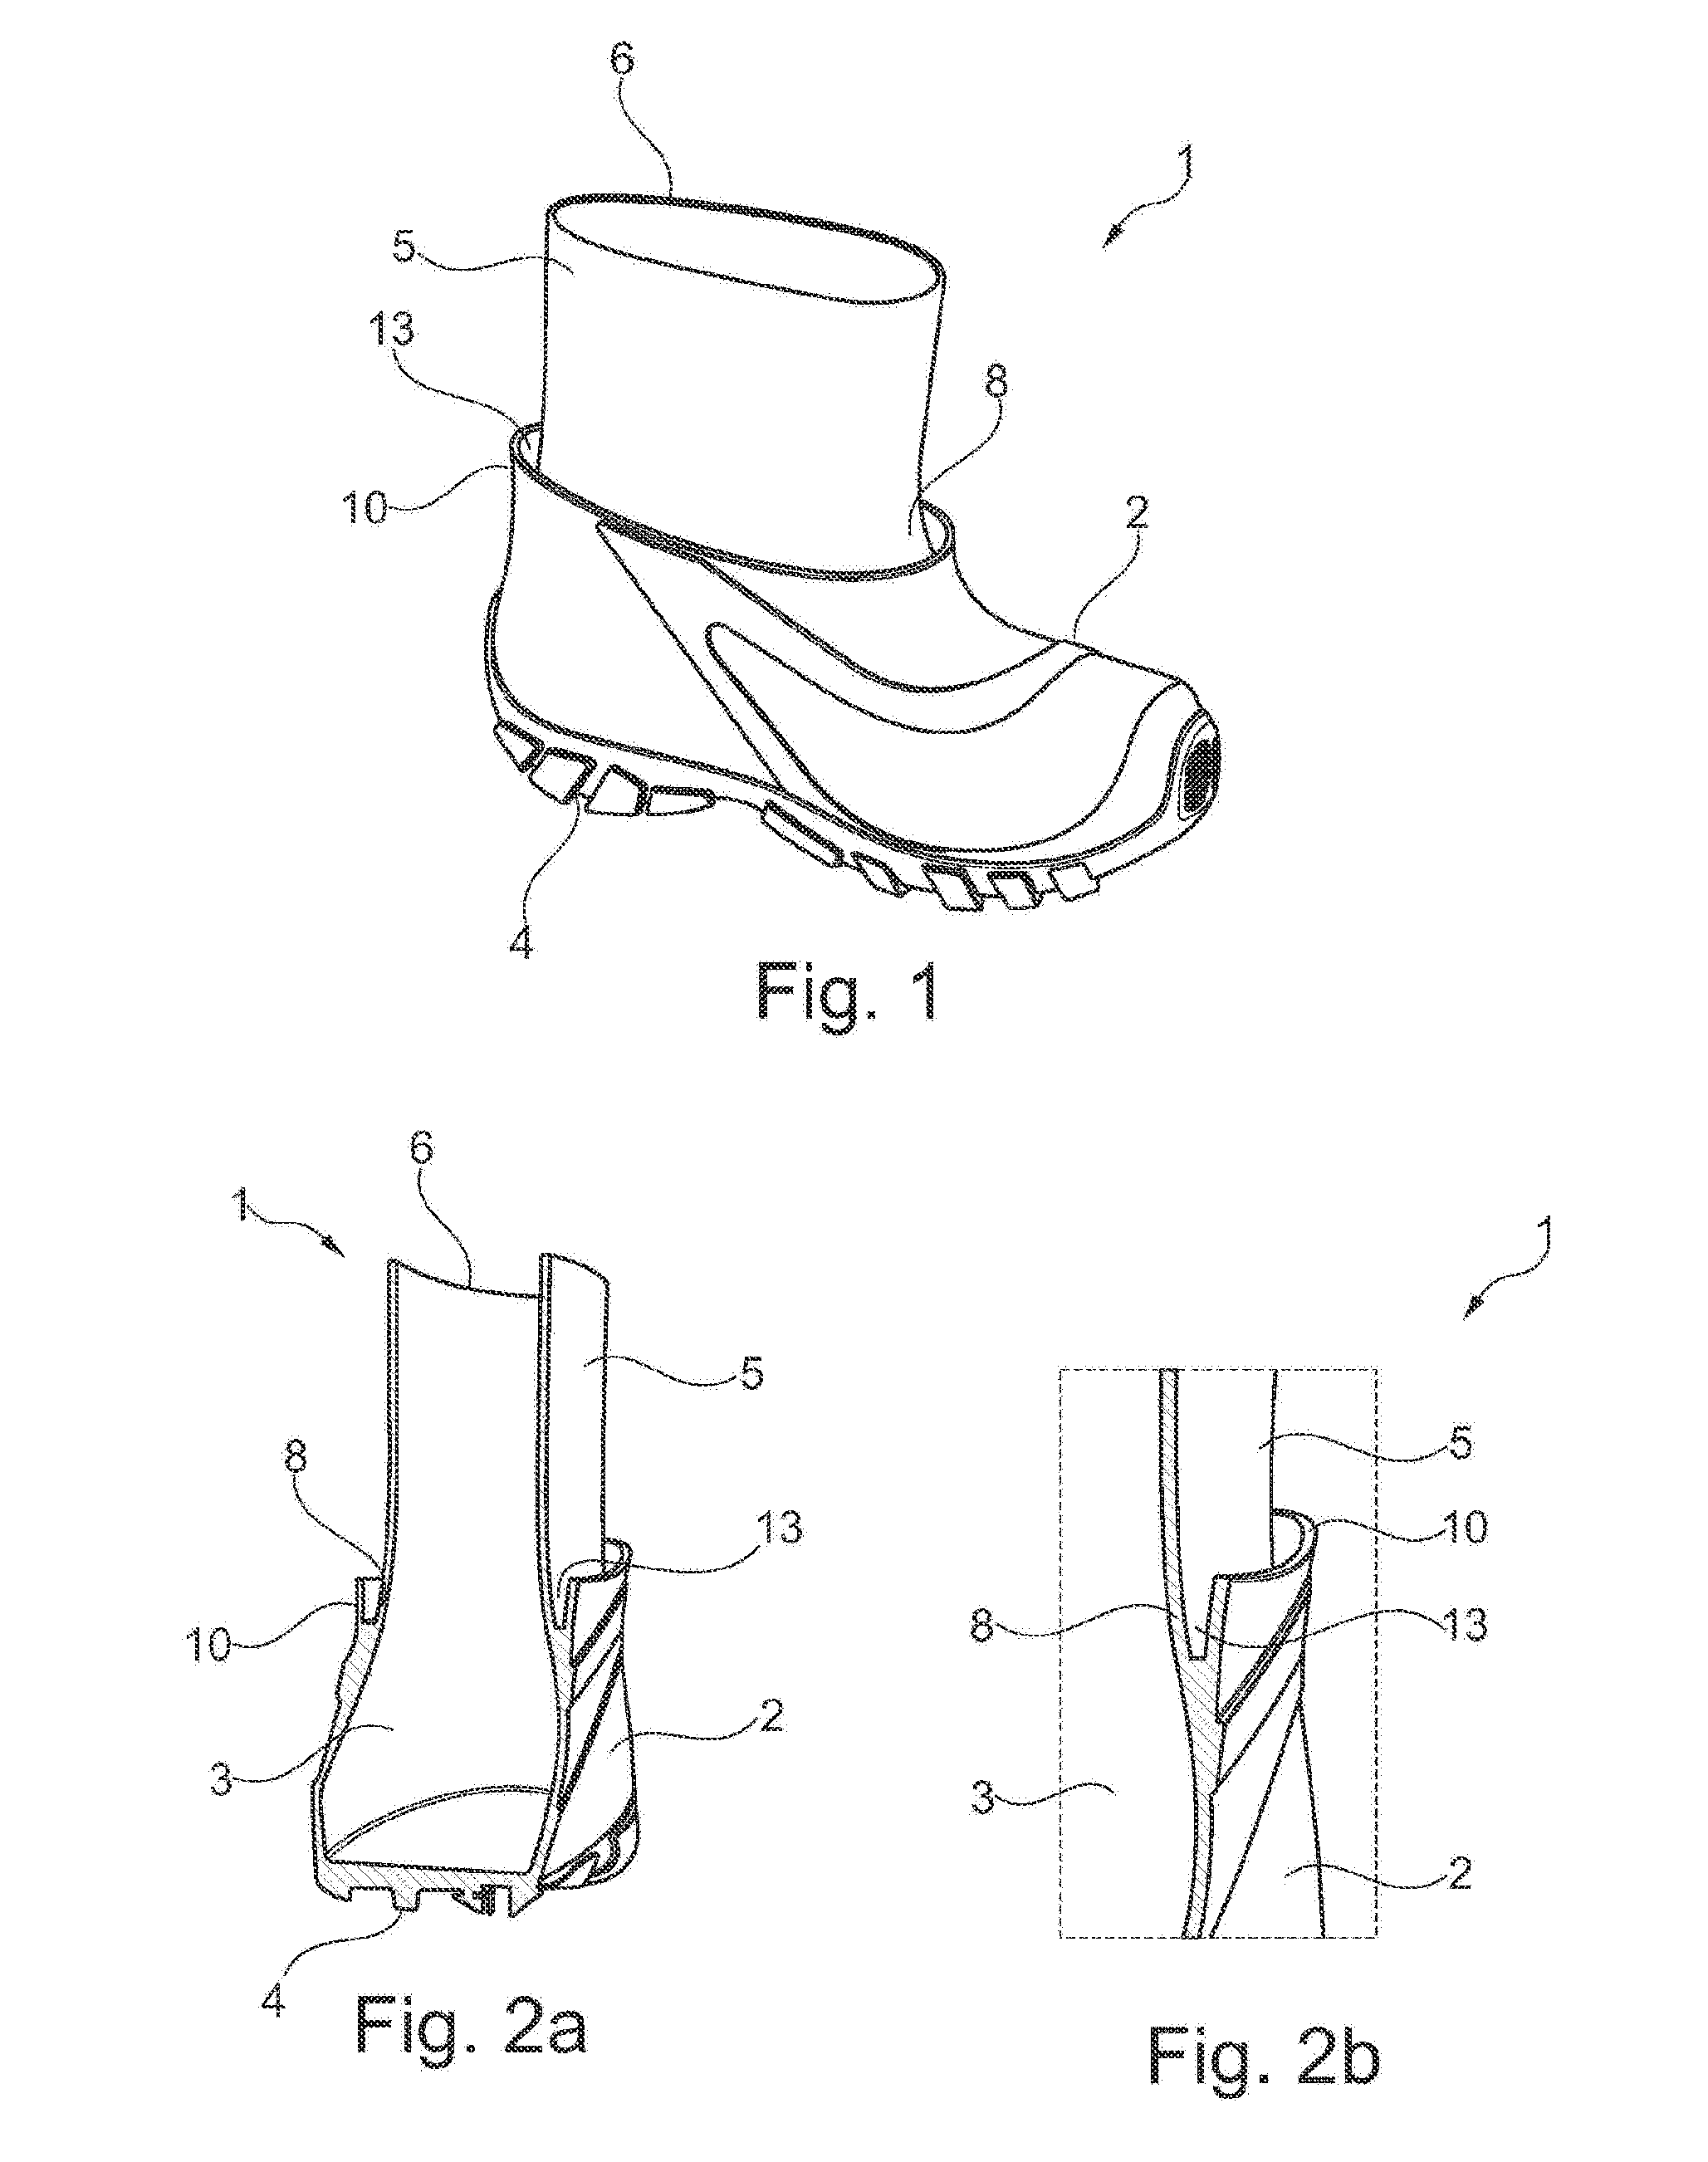 Method for producing a footwear item having a shoe provided with an external upper